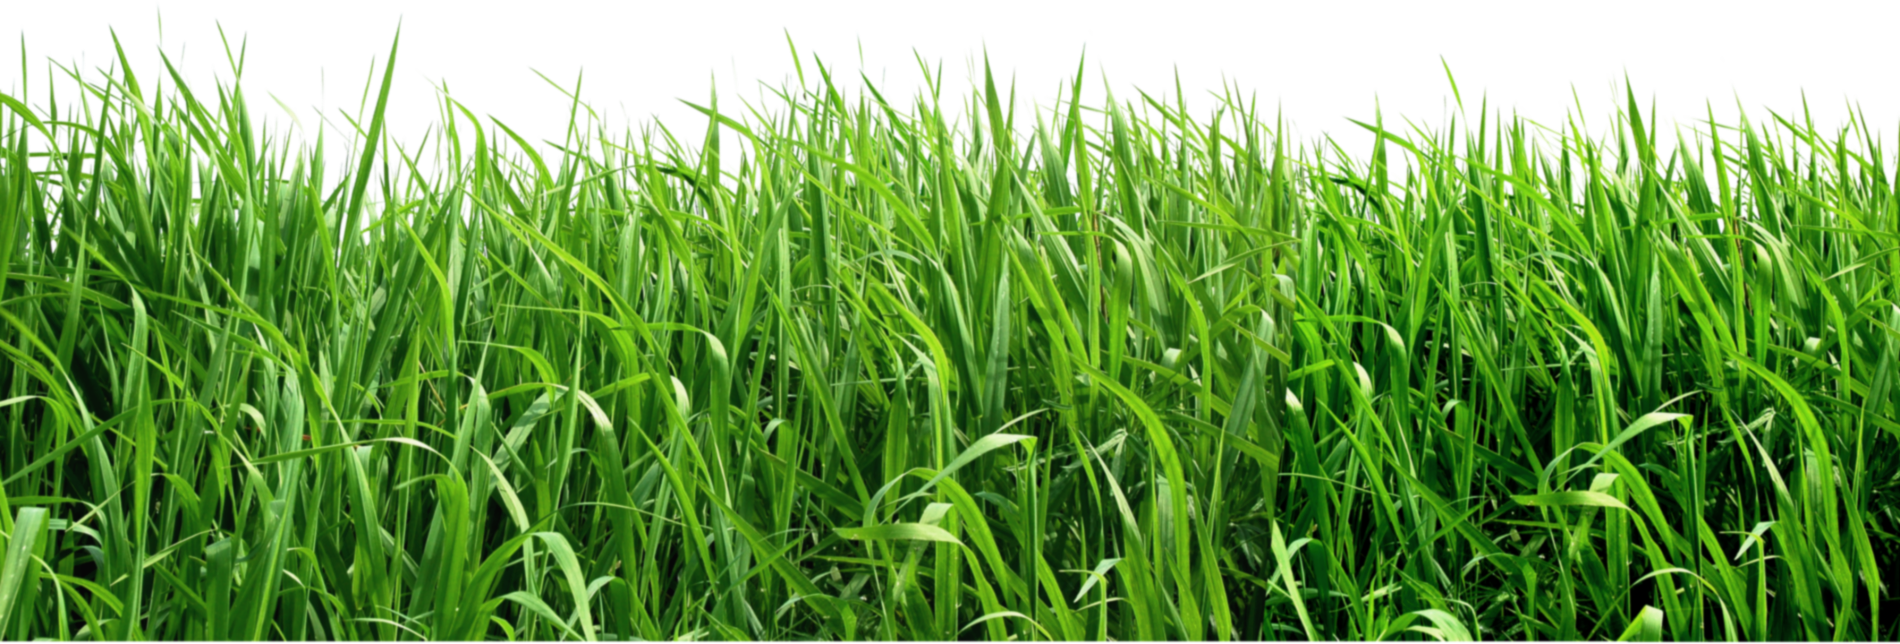 png clipart grass - photo #39